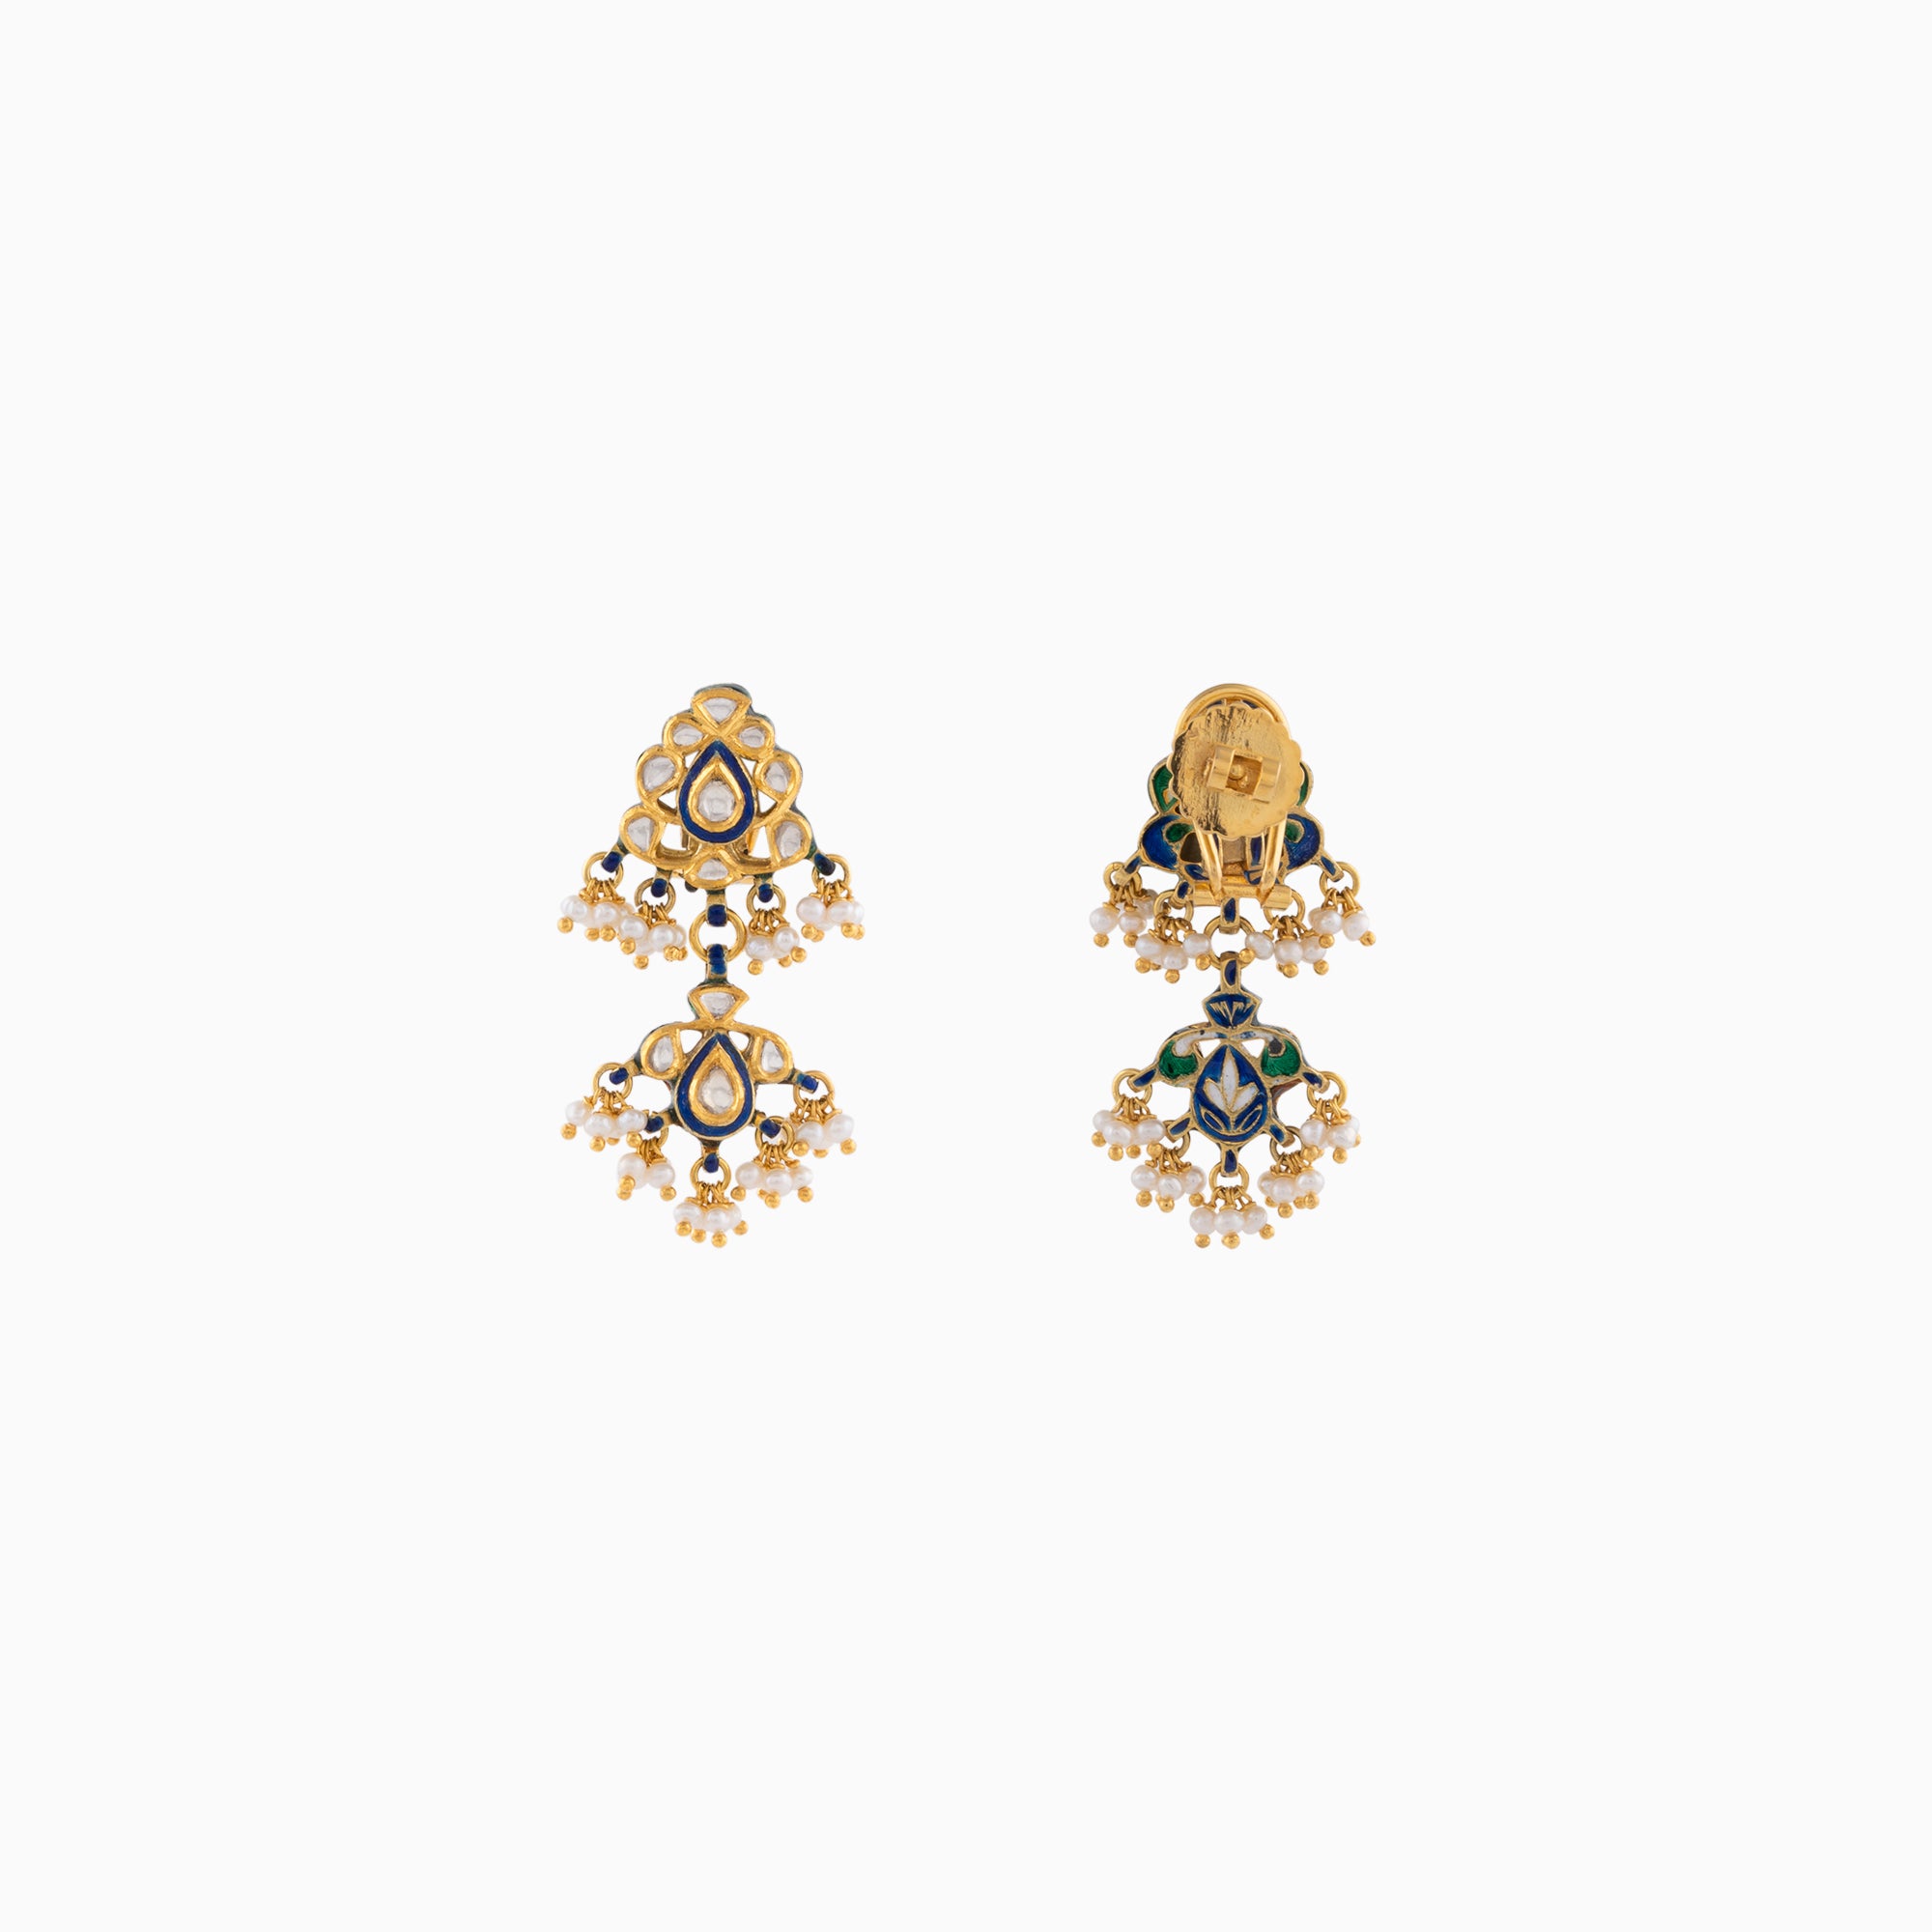 Earring Pair with Gold, Uncut Polki Diamond and Pearls-KMNE1641